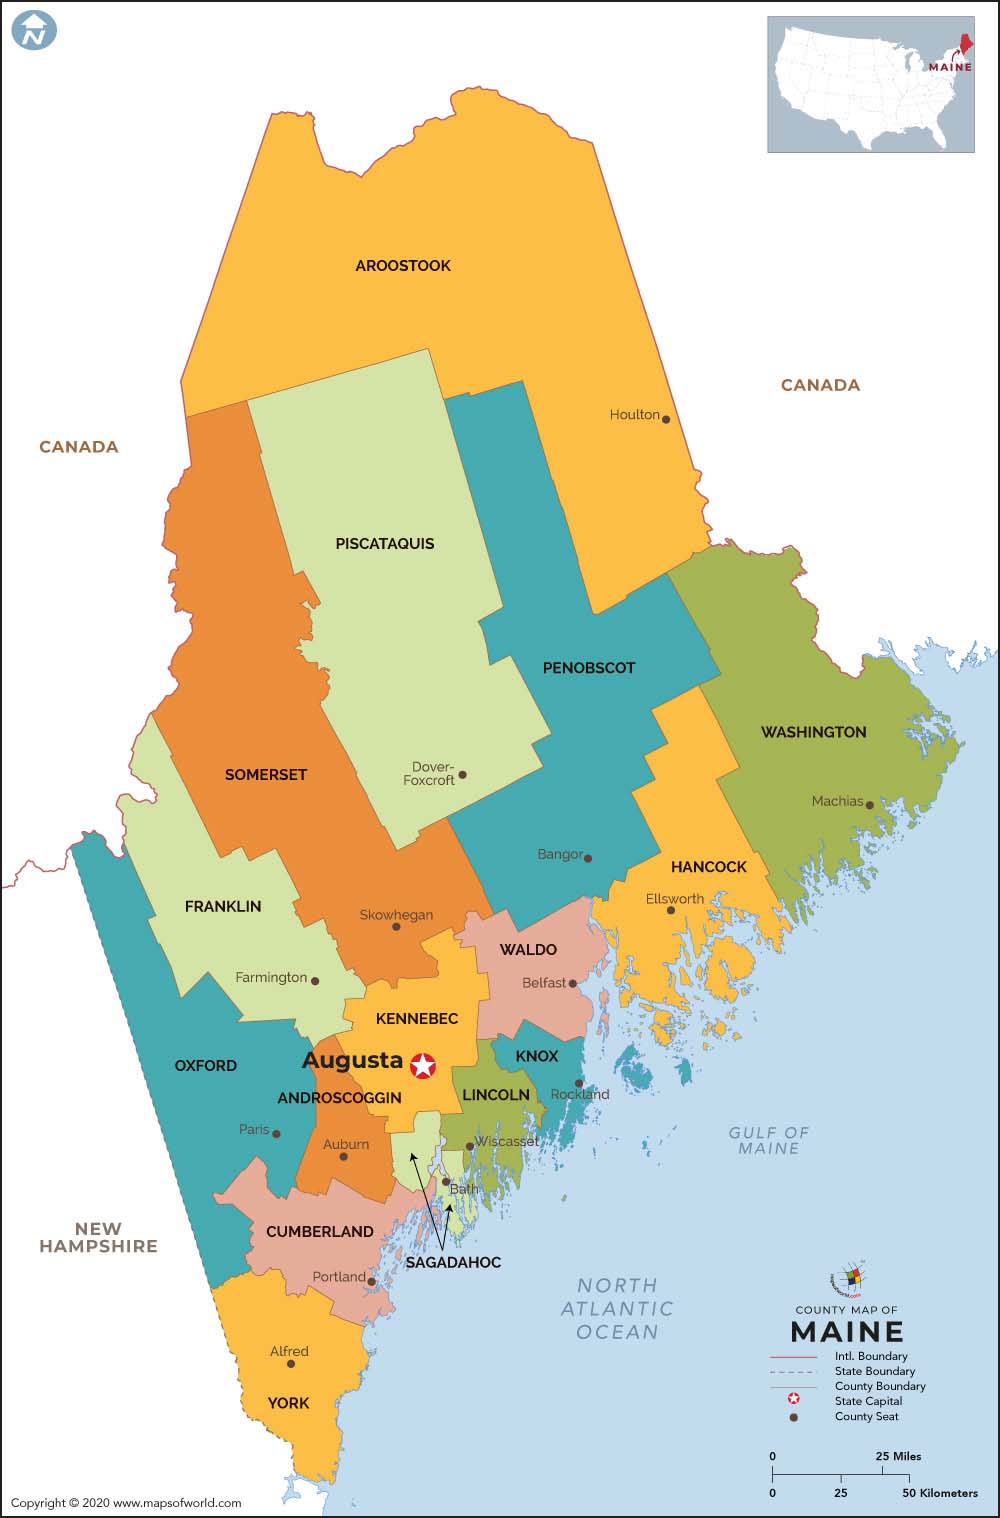 Maine County Map